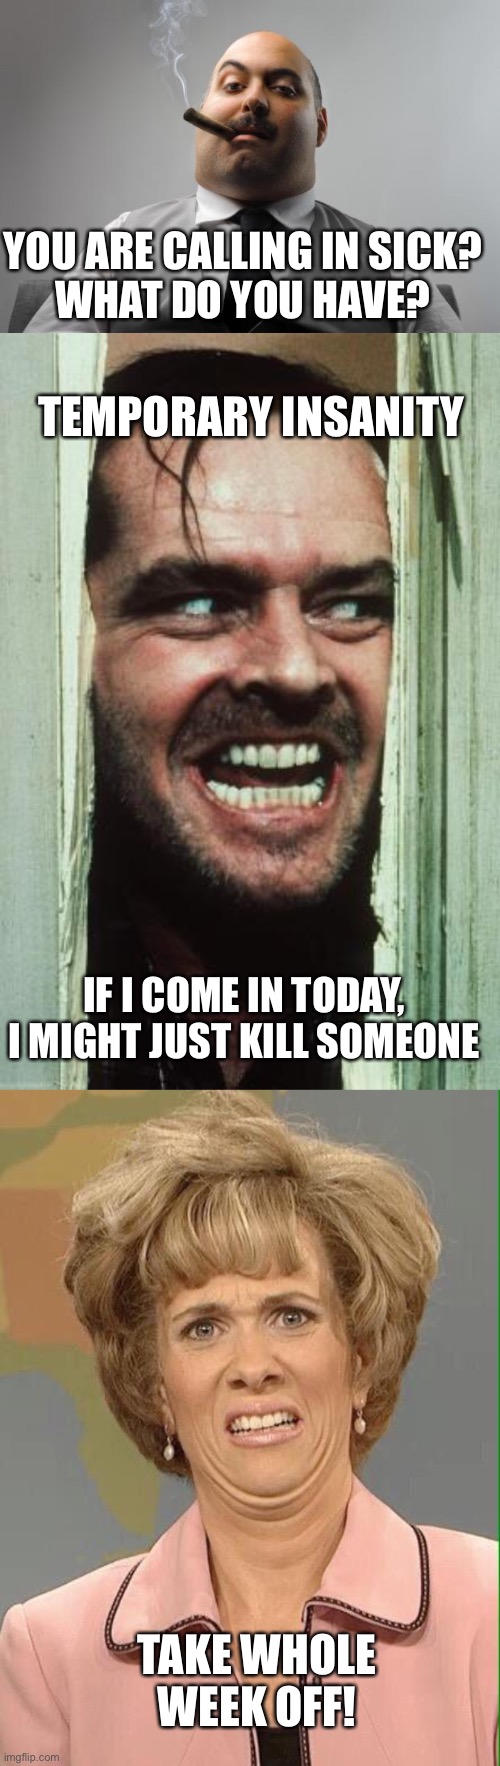 This is best used on a Monday! | YOU ARE CALLING IN SICK?
WHAT DO YOU HAVE? TEMPORARY INSANITY; IF I COME IN TODAY, I MIGHT JUST KILL SOMEONE; TAKE WHOLE WEEK OFF! | image tagged in scumbag boss,here's johnny,eww,temporary insanity | made w/ Imgflip meme maker